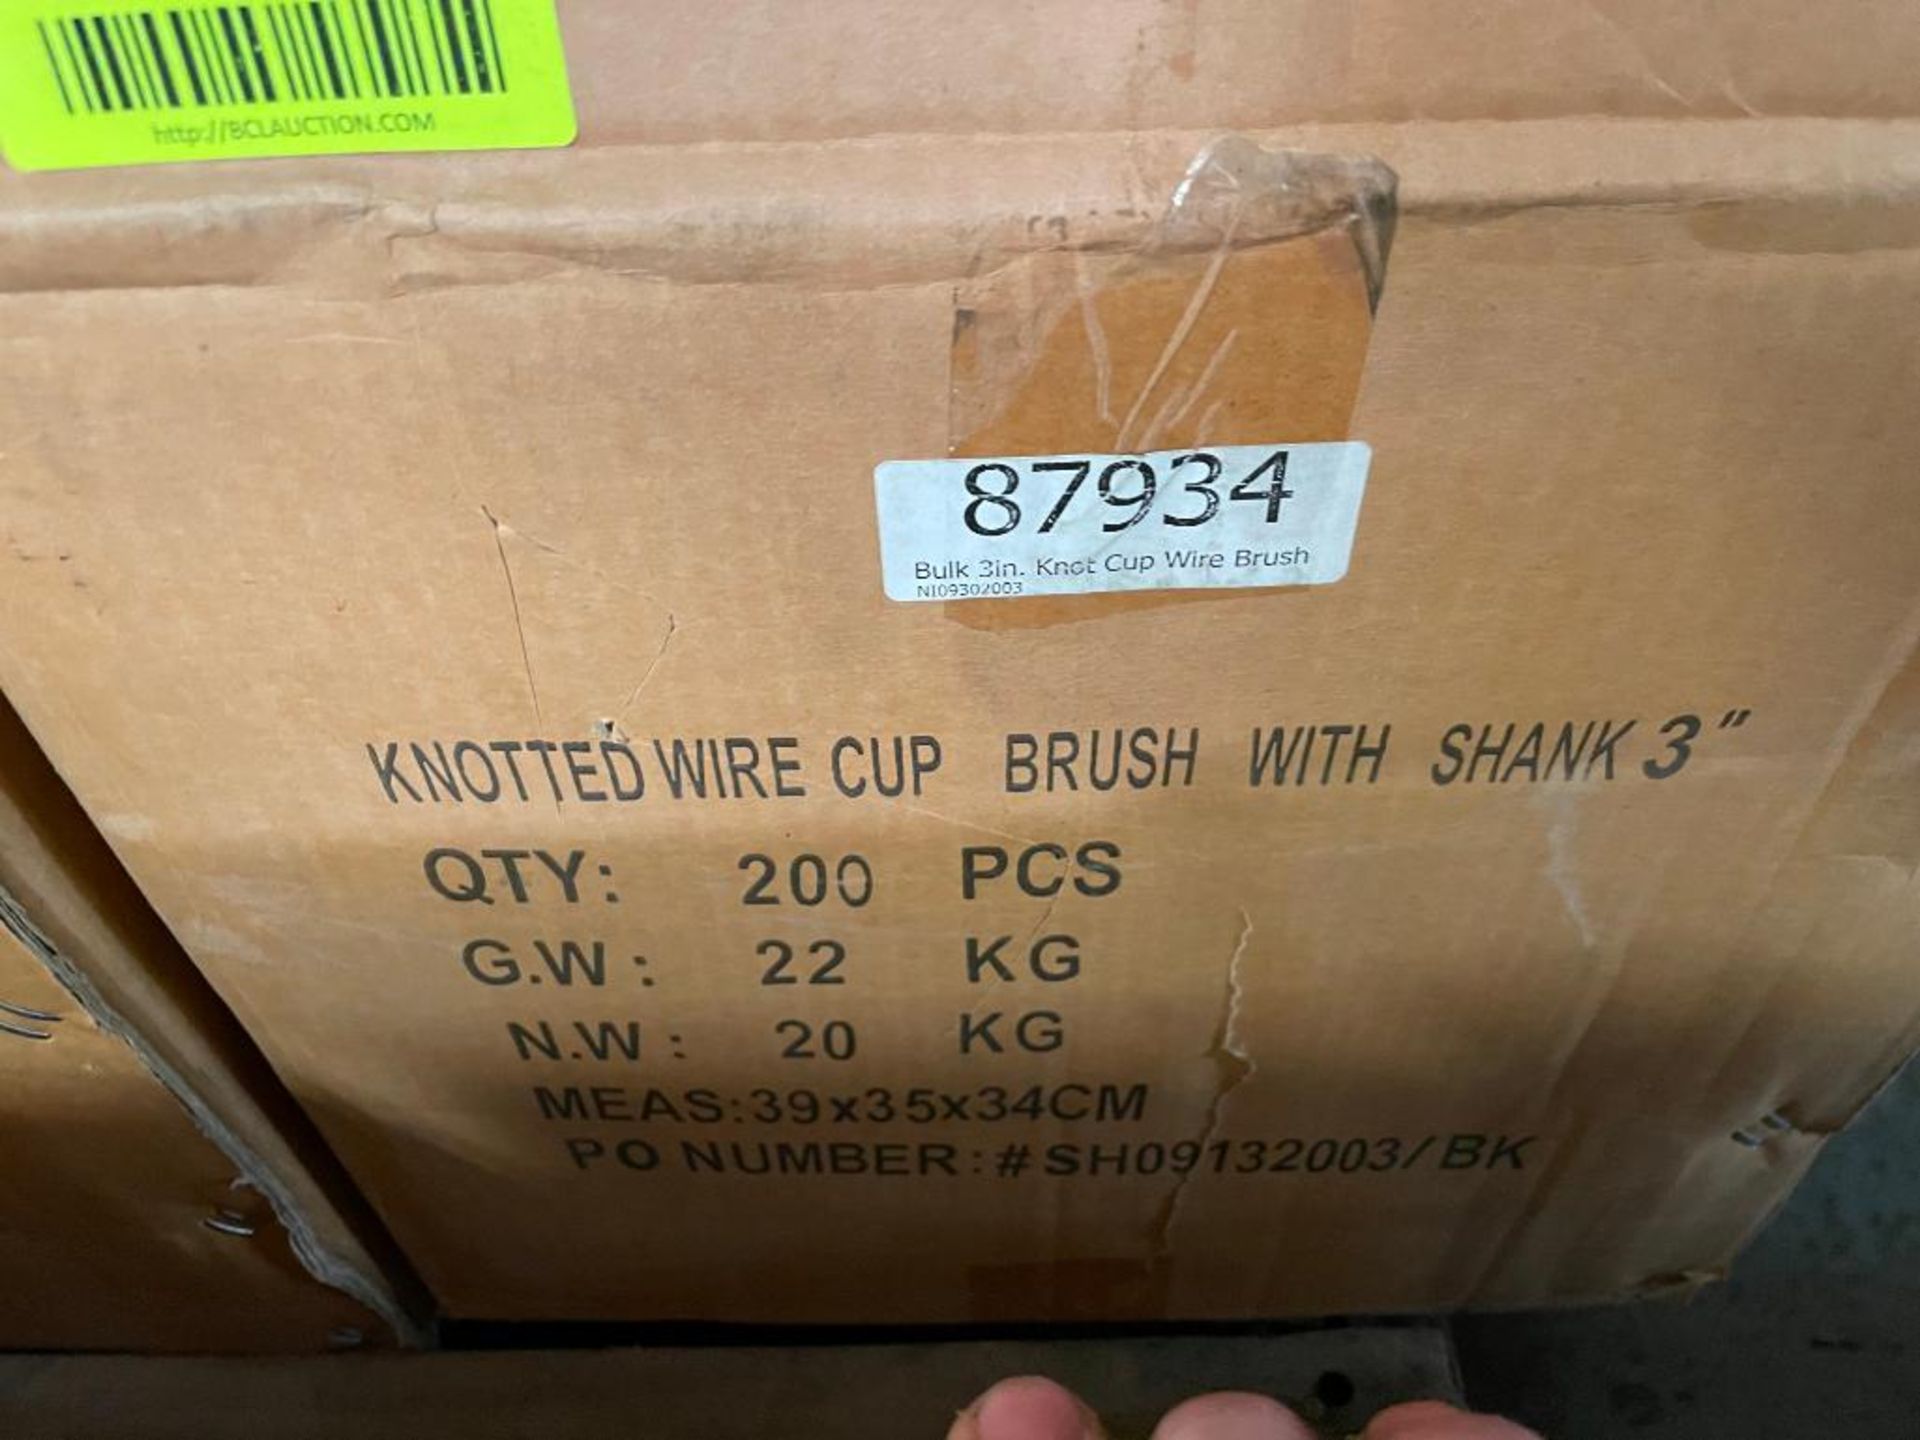 200CT 3" KNOTTED CUP WIRE BRUSHES WITH 1/4" SHANK BRAND/MODEL EAZYPOWER 87934 ADDITIONAL INFO TOTAL - Image 2 of 2